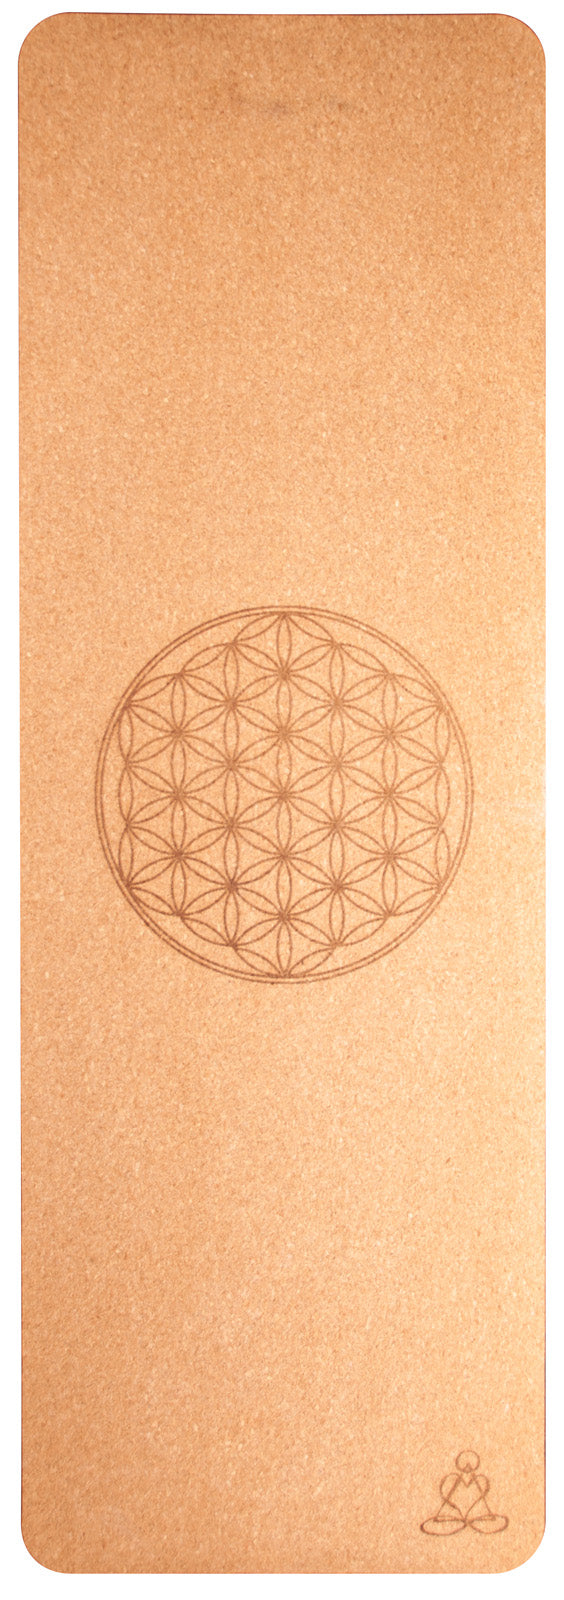 Yoga mat made of cork with flower of life